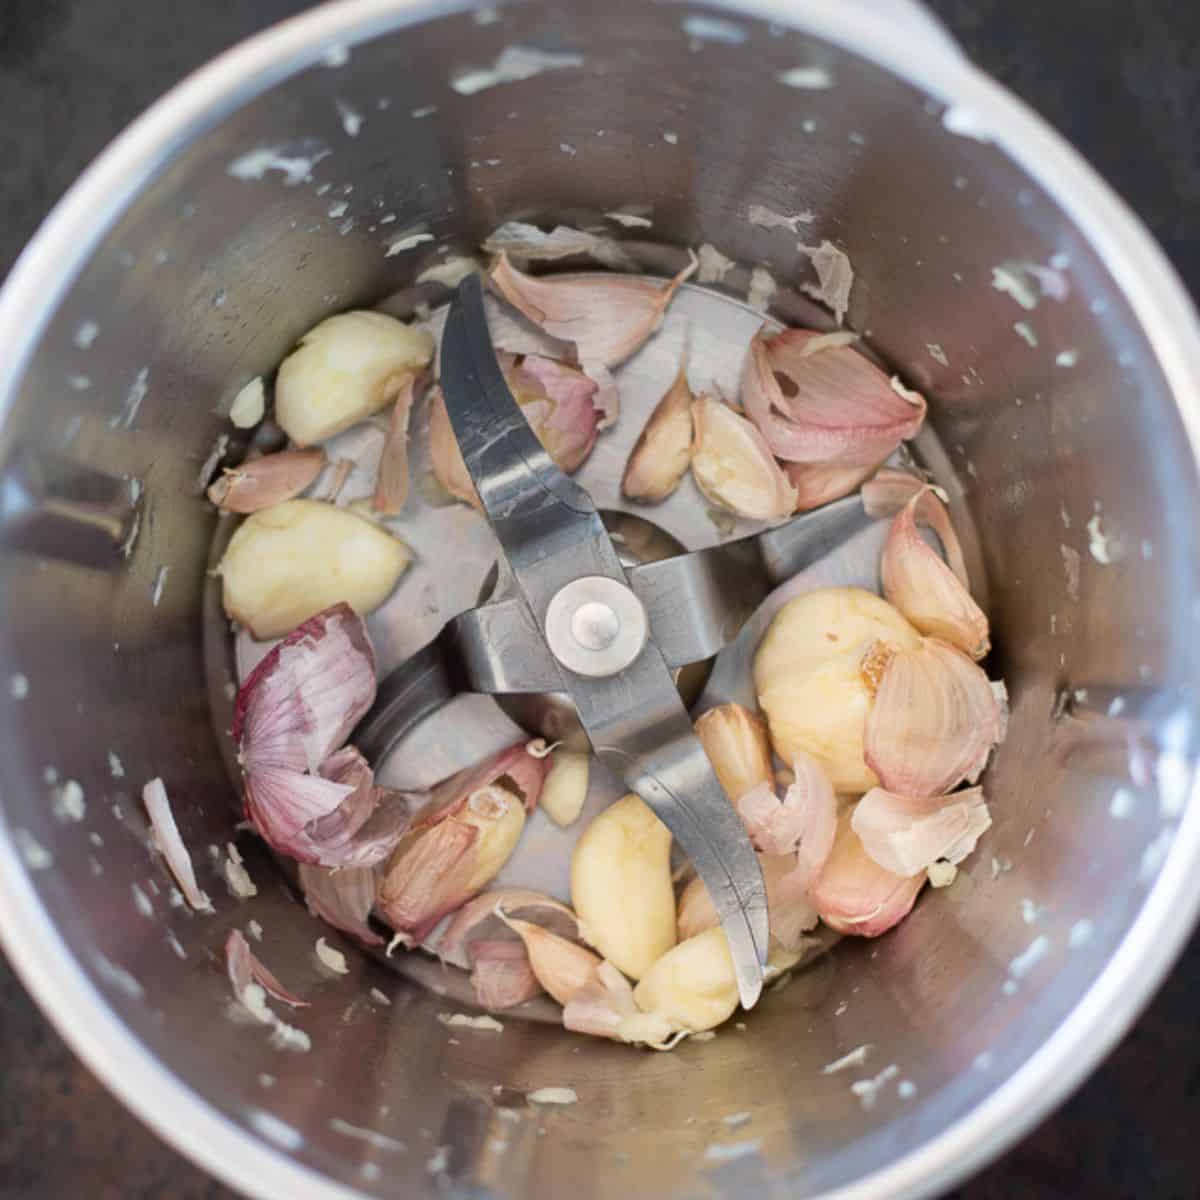 Peeled garlic cloves in the Thermomix.